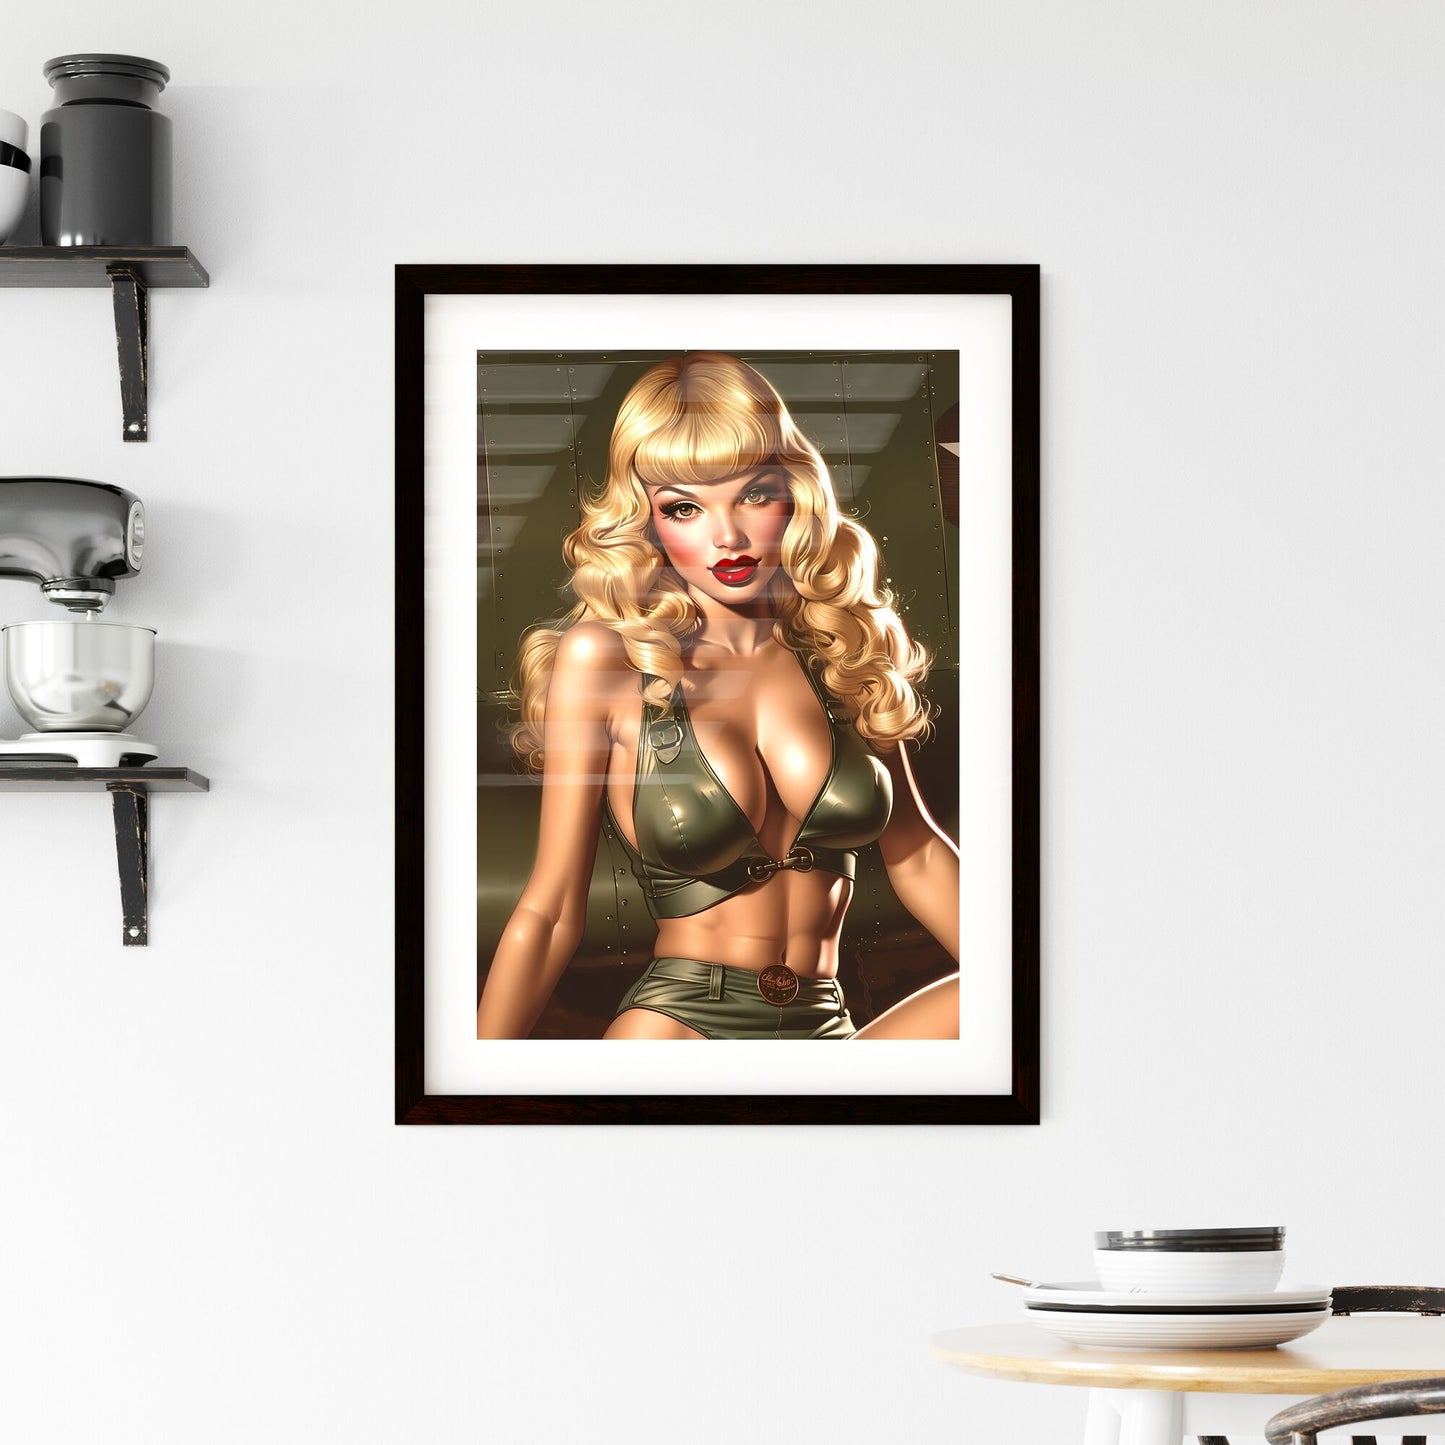 1950's pin up, has blond hair, red lipstick - Art print of a street with colorful buildings and people on it Default Title